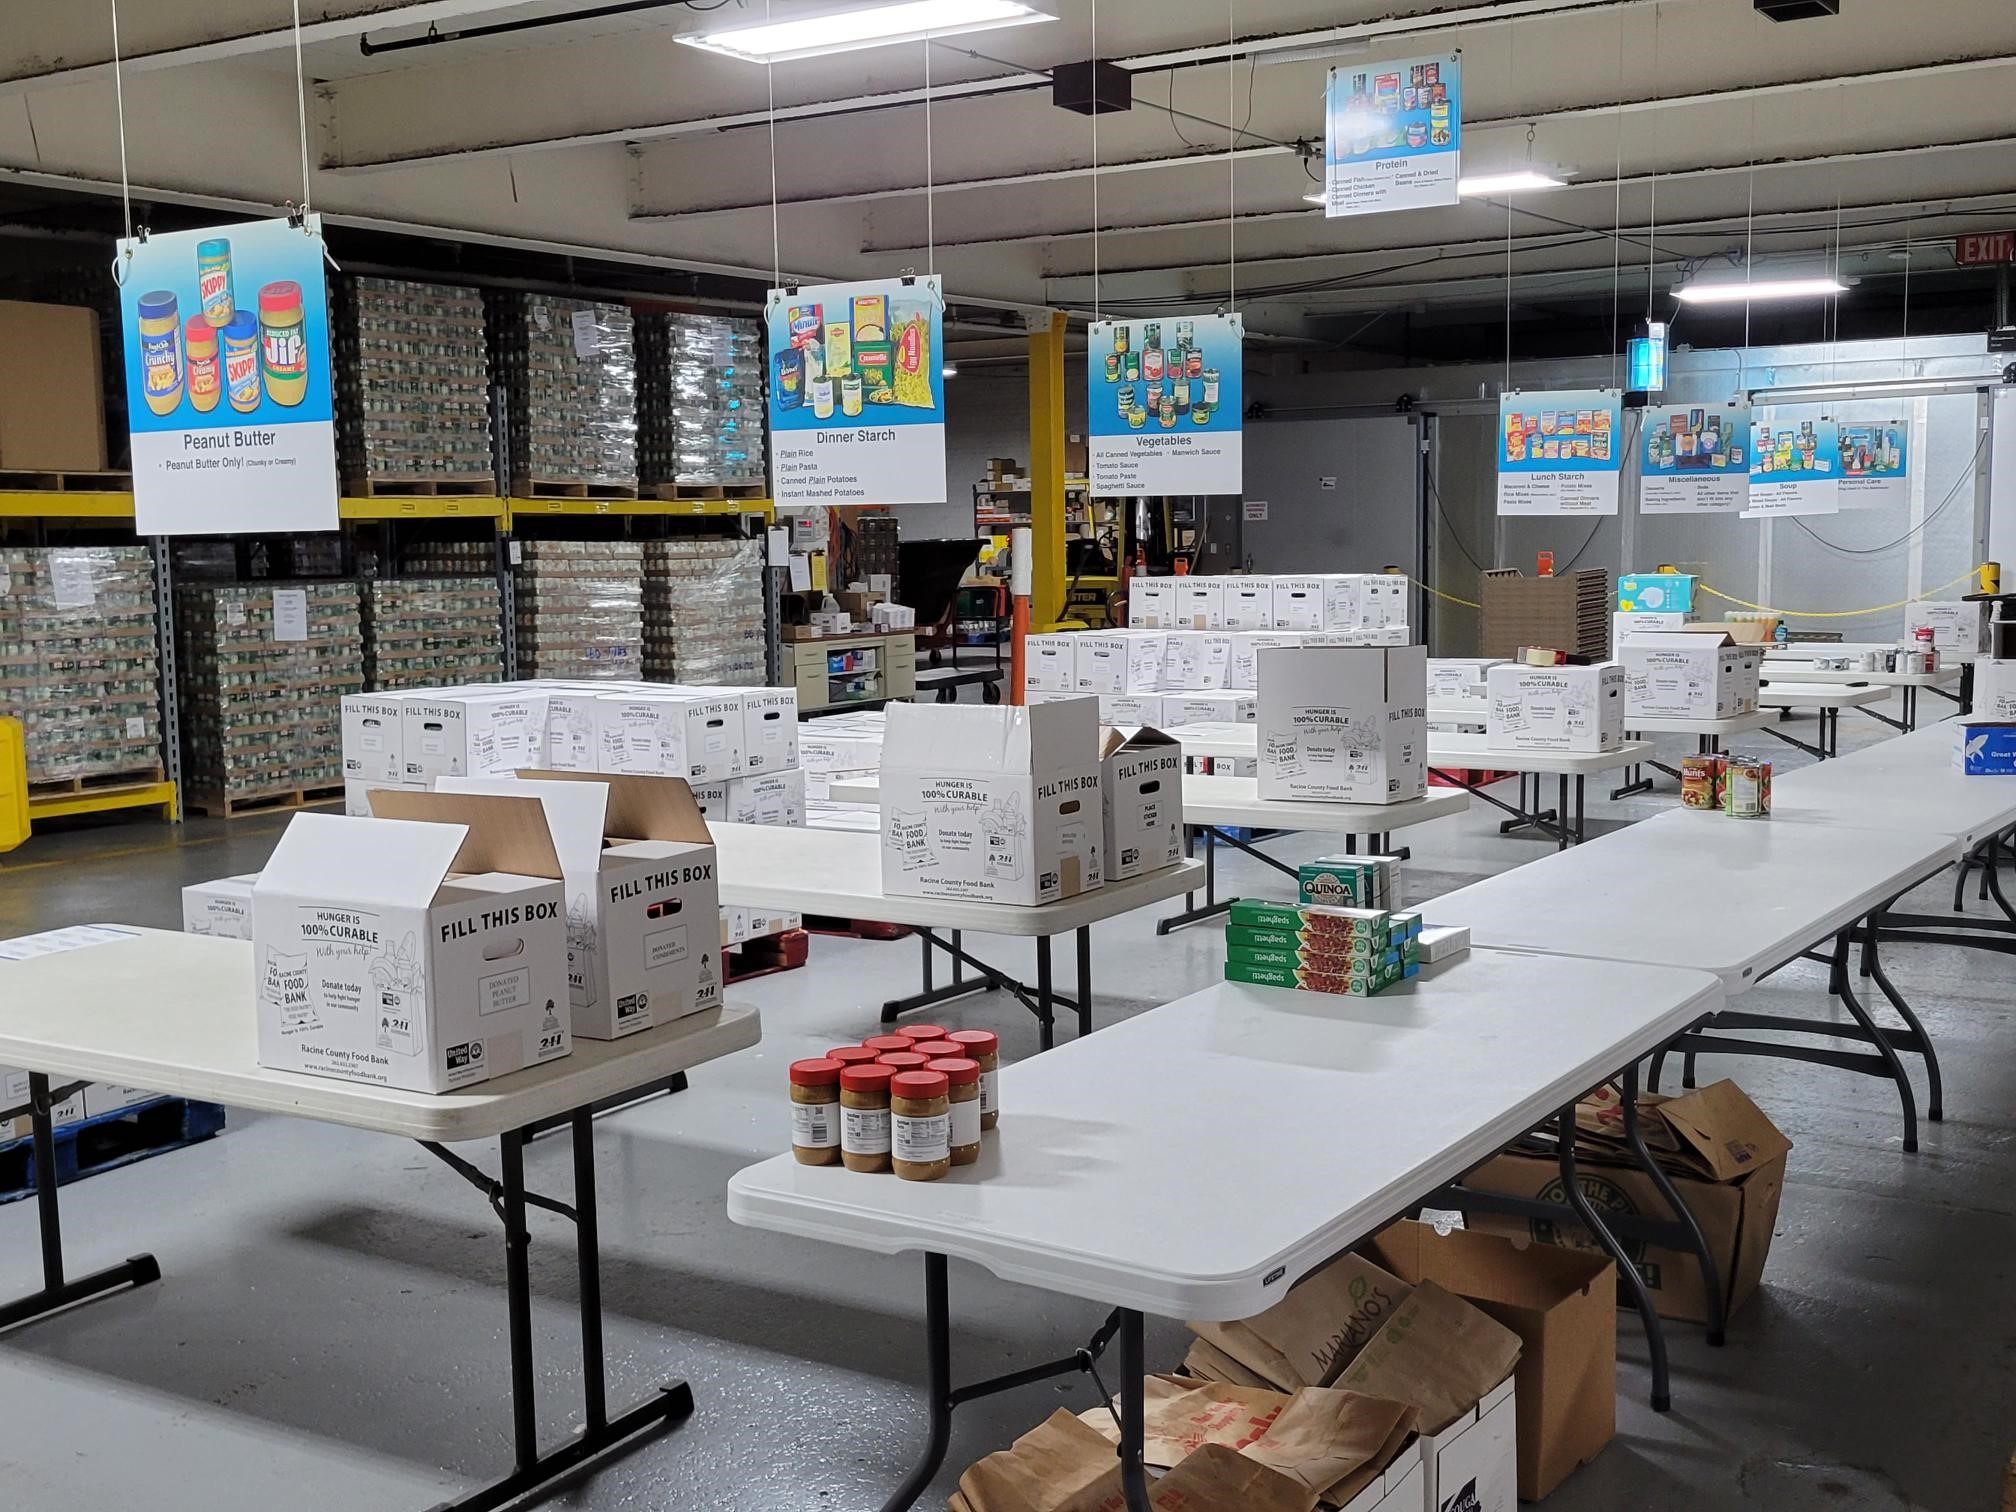 The Racine County Food Bank sorting area - several rows of white tables, each piled either with white Food Bank boxes or with stacks of household staples. Signs above the space label stations for different types of food, such as peanut butter and dinner starch. In the background, pallets full of cans are stacked to the ceiling of the warehouse.